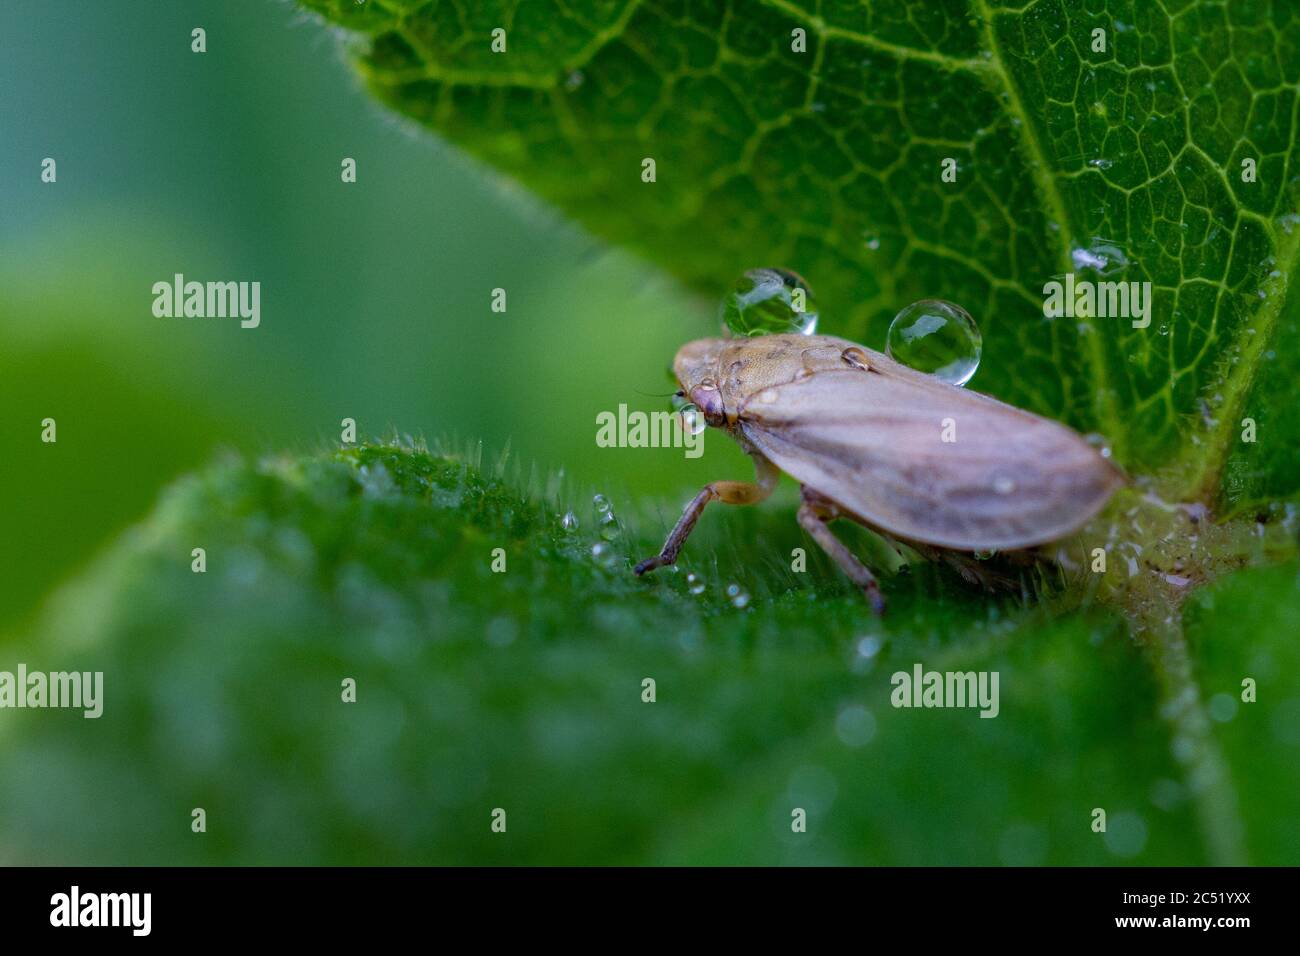 UK wildlife: Froghopper (Philaenus spumarius), maker of cuckoo spit, perched in the centre of a leaf on a rainy day. Stock Photo